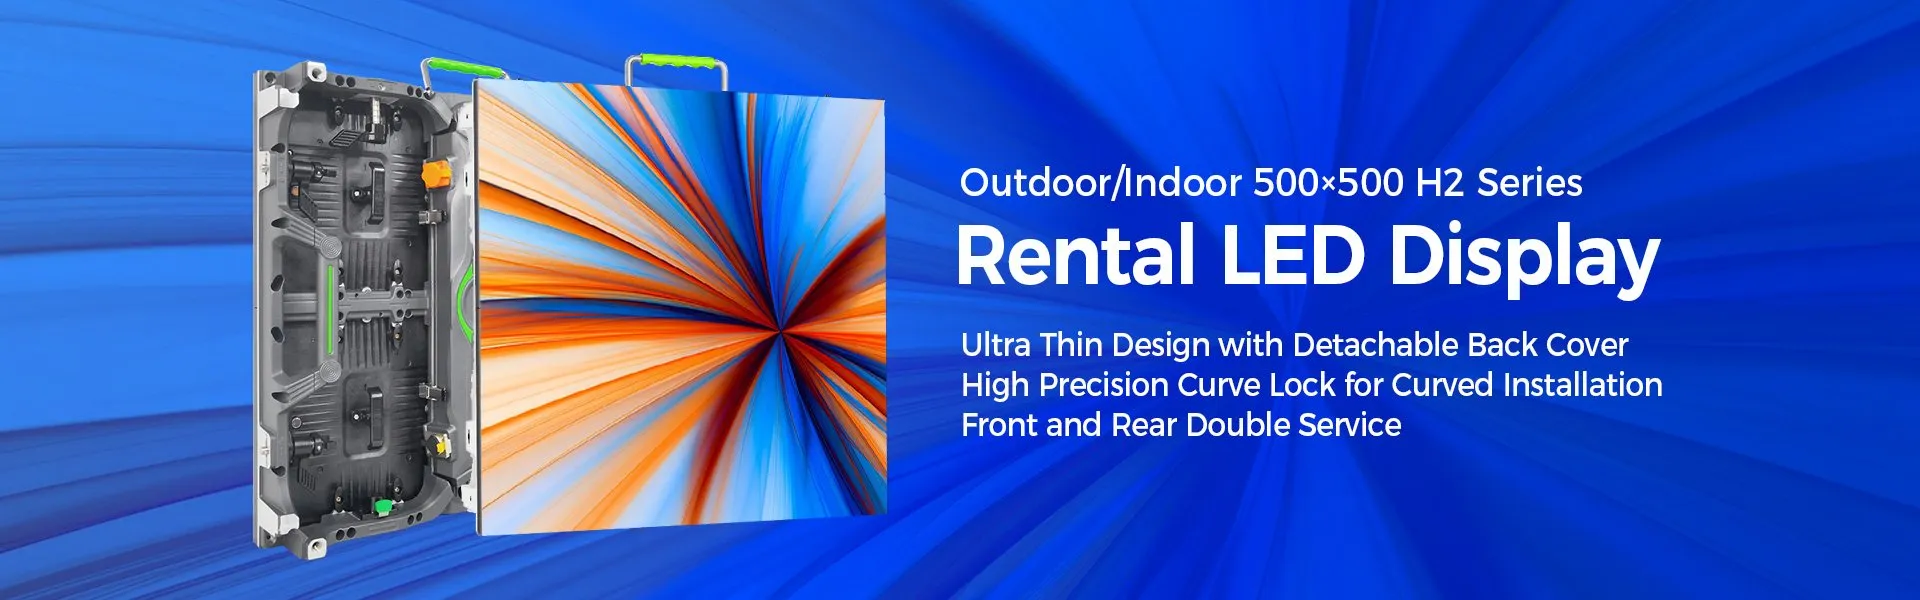 500H2 Series Front Maintenance Curved LED Screen 500×500 for Rental Outdoor P4.81 P3.91 P2.976 P2.604 P1.953 P1.5